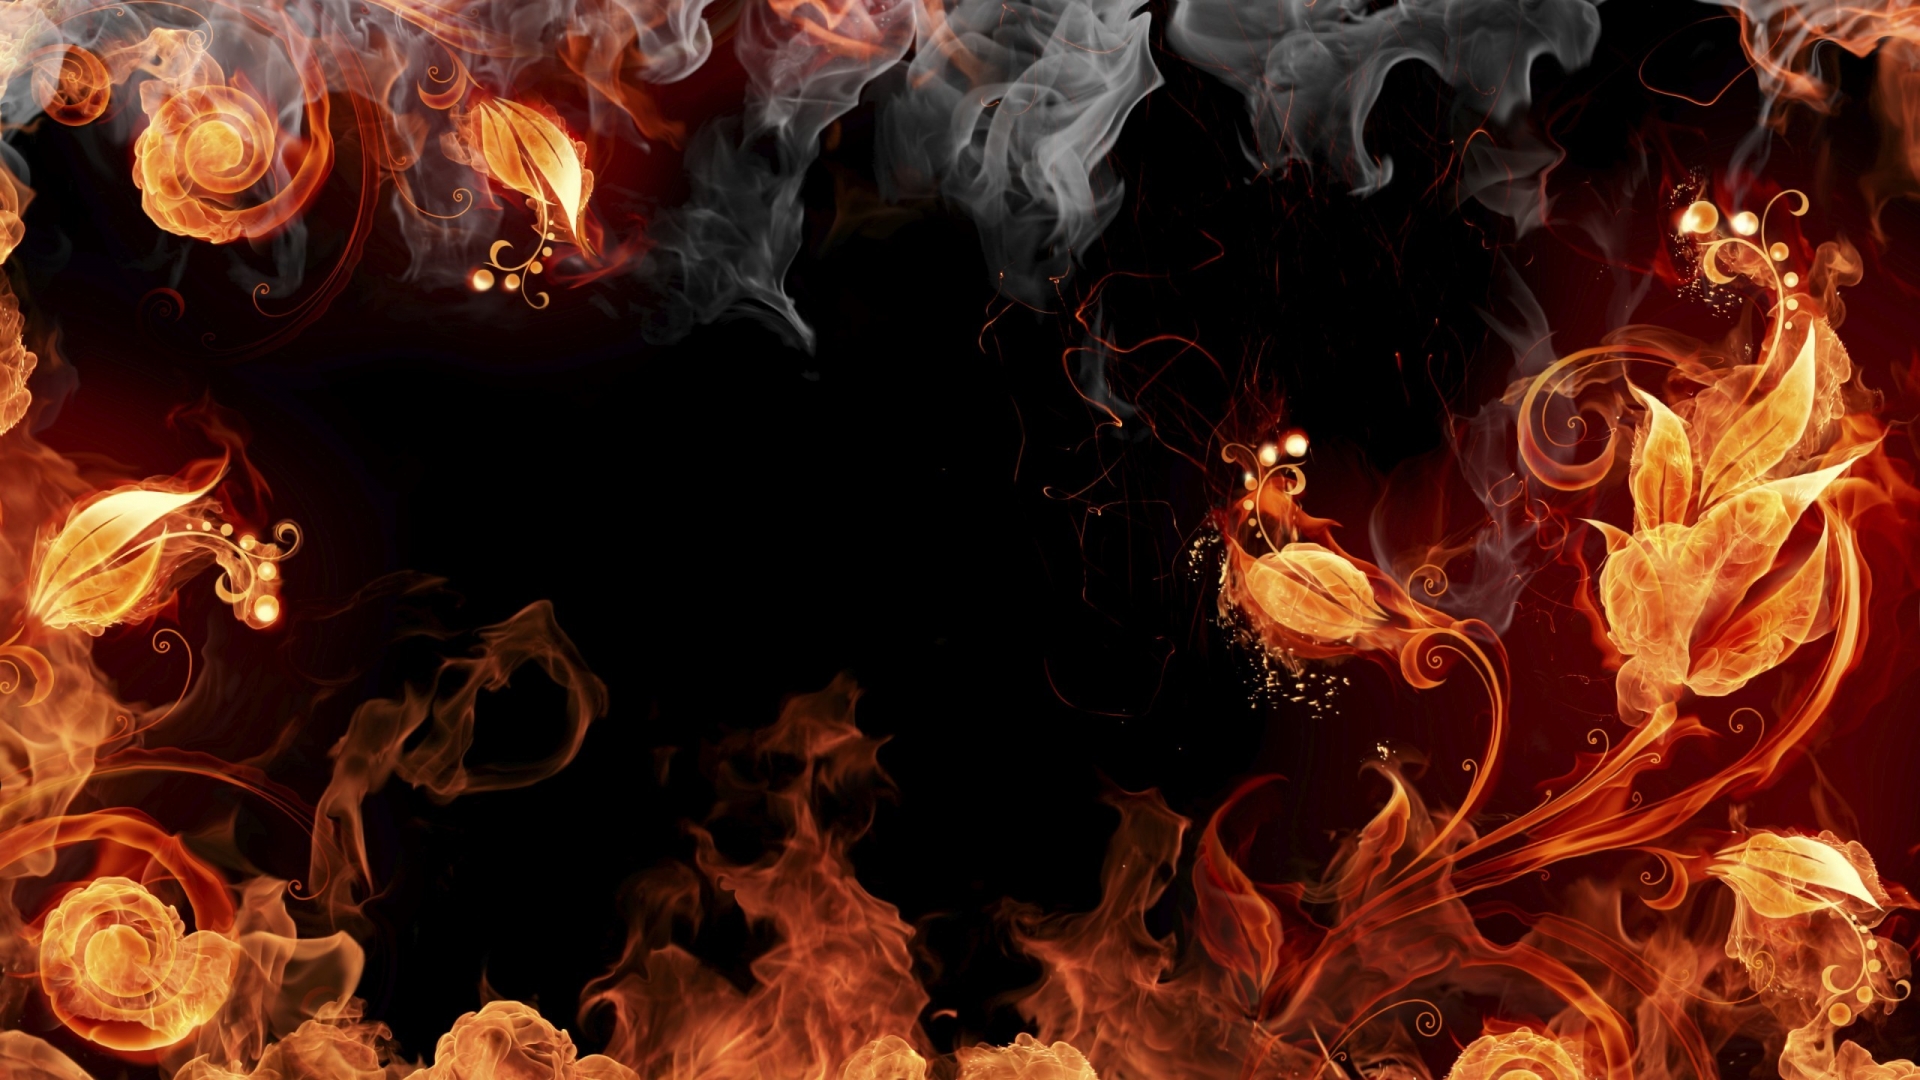 Fire Abstract Art for 1920 x 1080 HDTV 1080p resolution